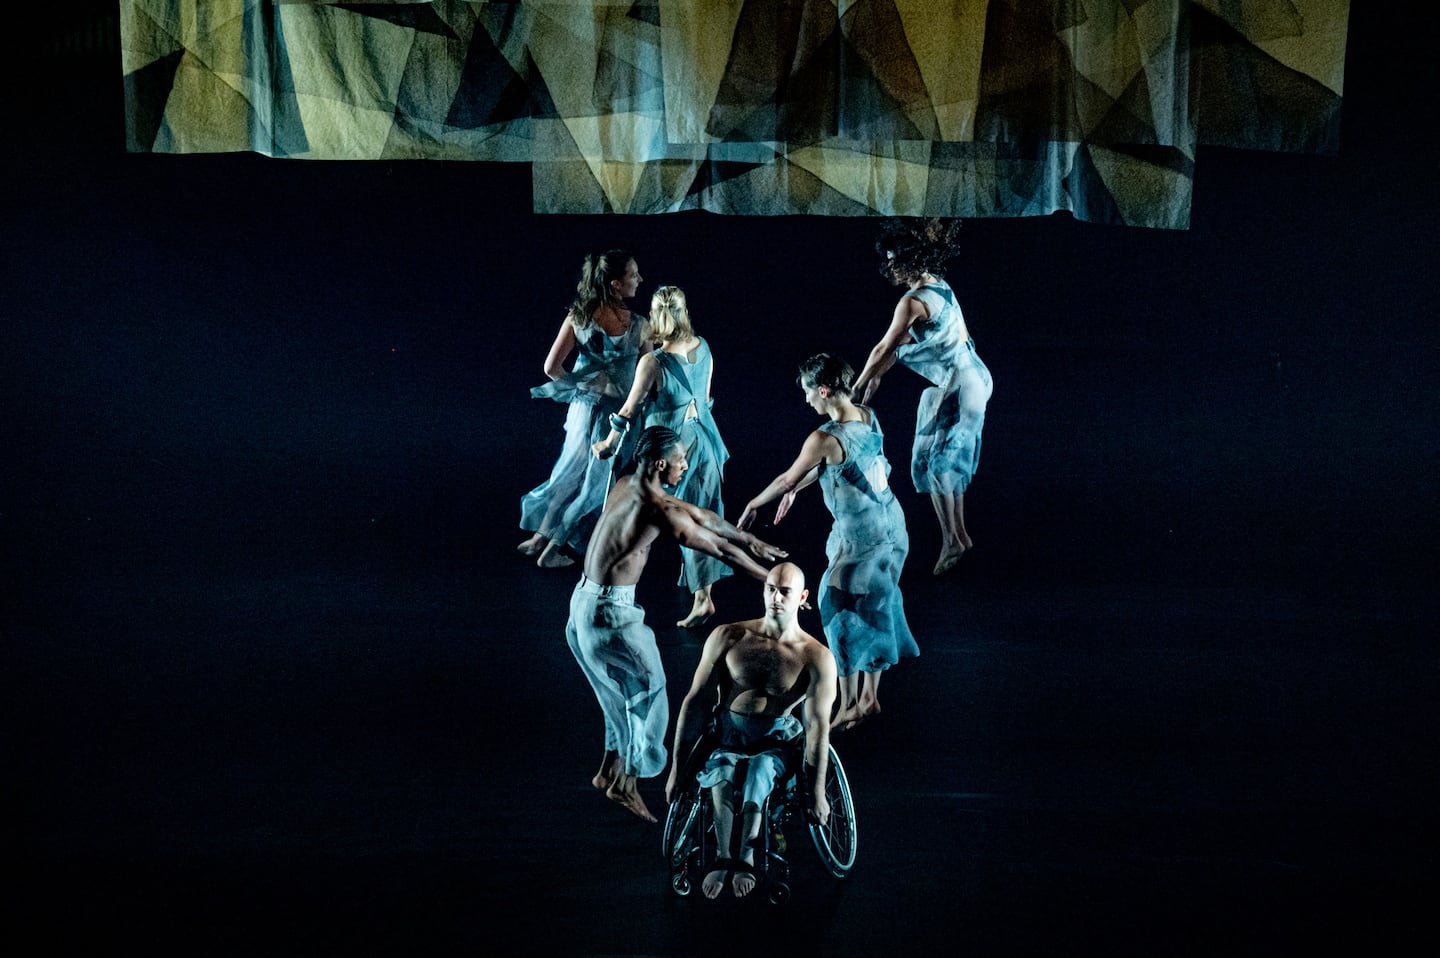 Dancers in loose V-formation with wheelchair user at the front, the others lined behind with arms loosely stretched forward. Above them hanging transparent cloths with geometric patterns echo their loose translucent costumes